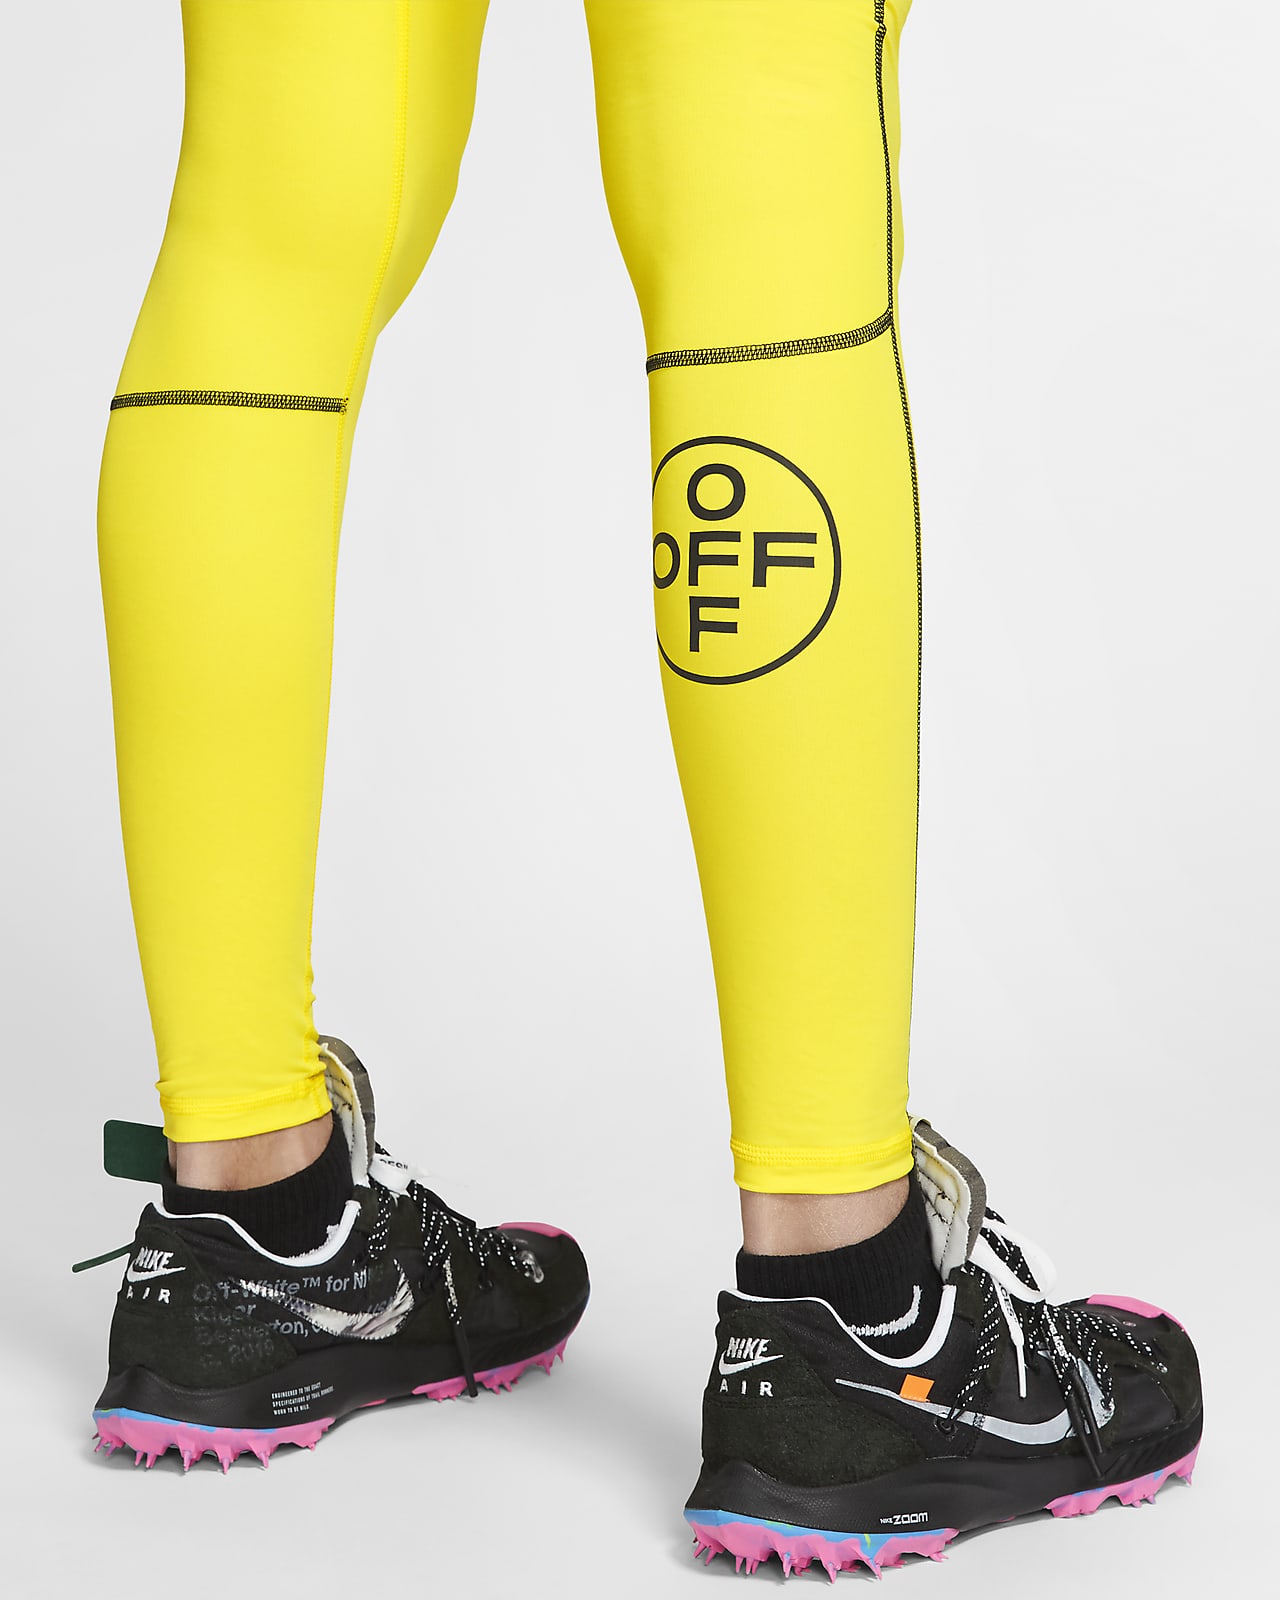 nike off white yellow tights